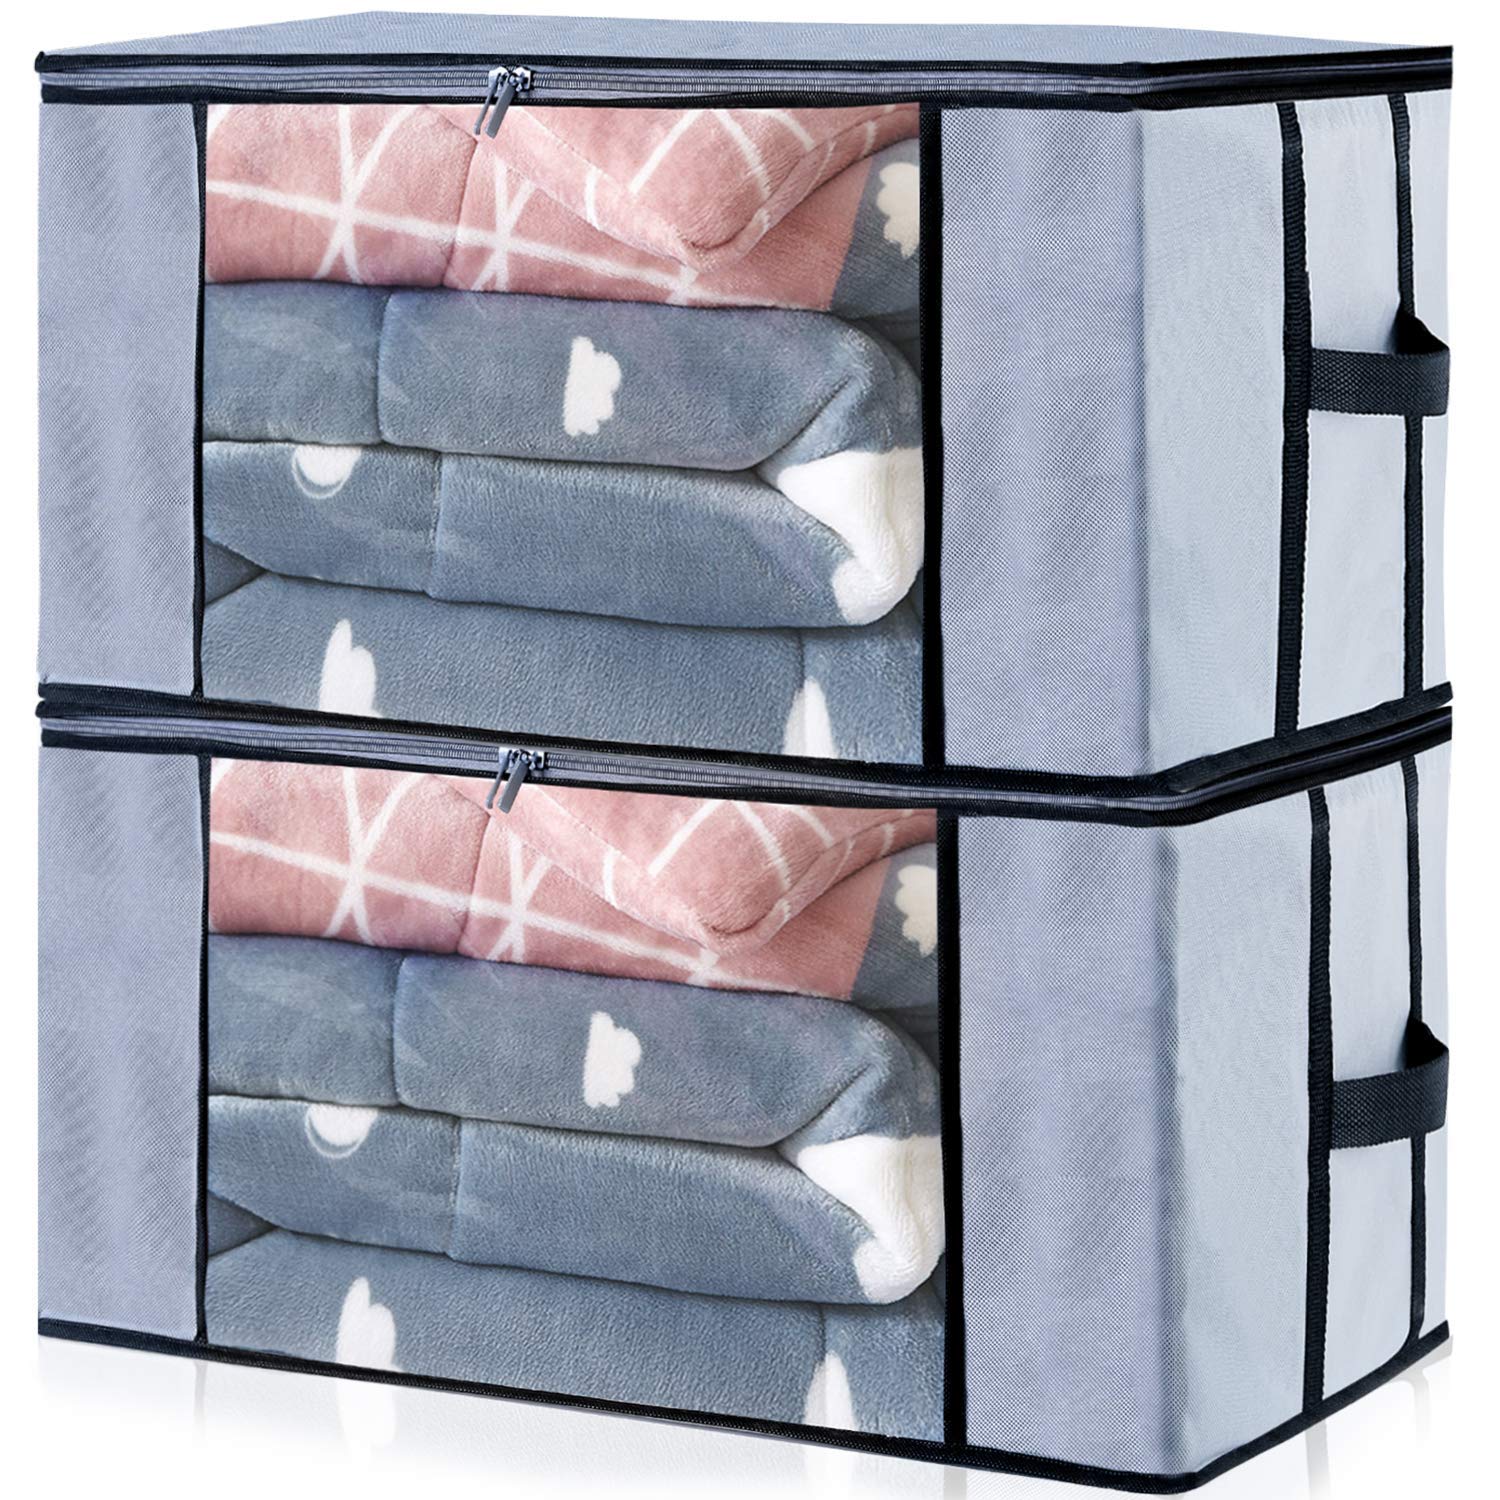 Cloth storage bag by Home Store India